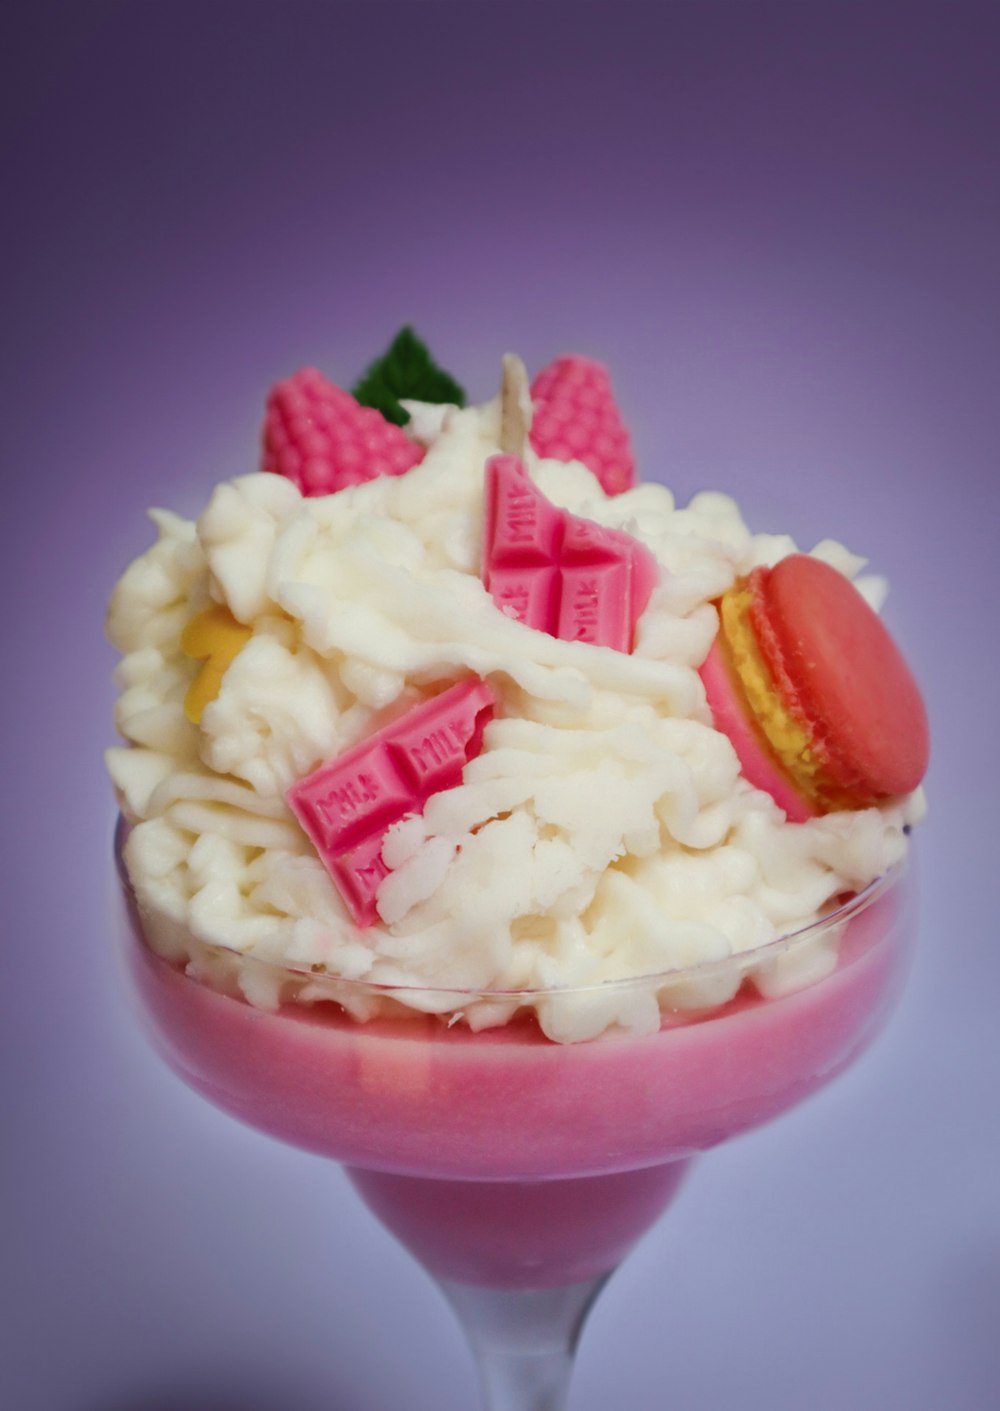 a dessert in a glass with a pink base